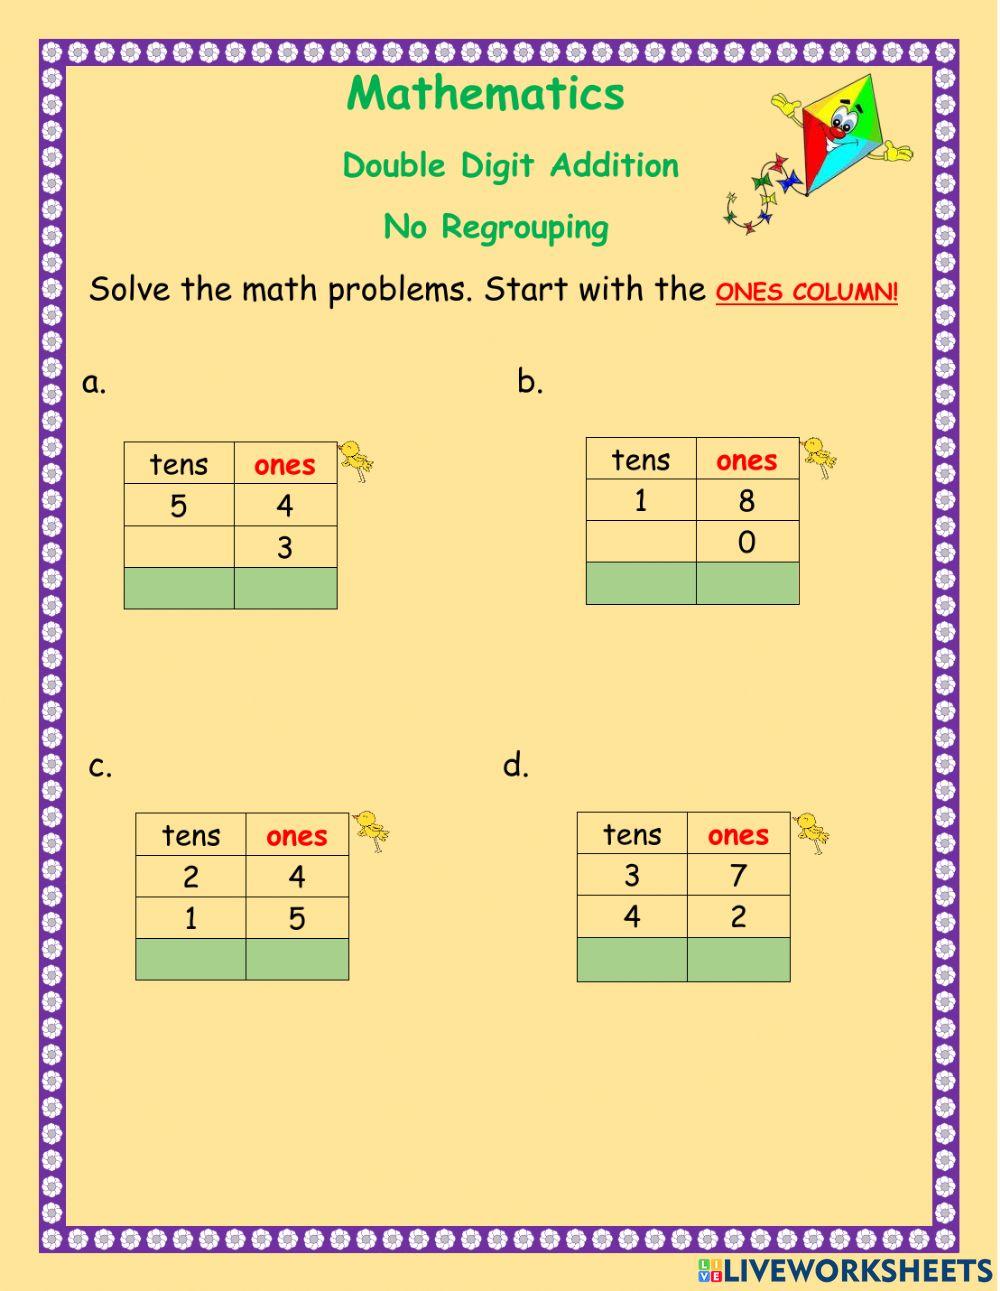 Double digit addition -1